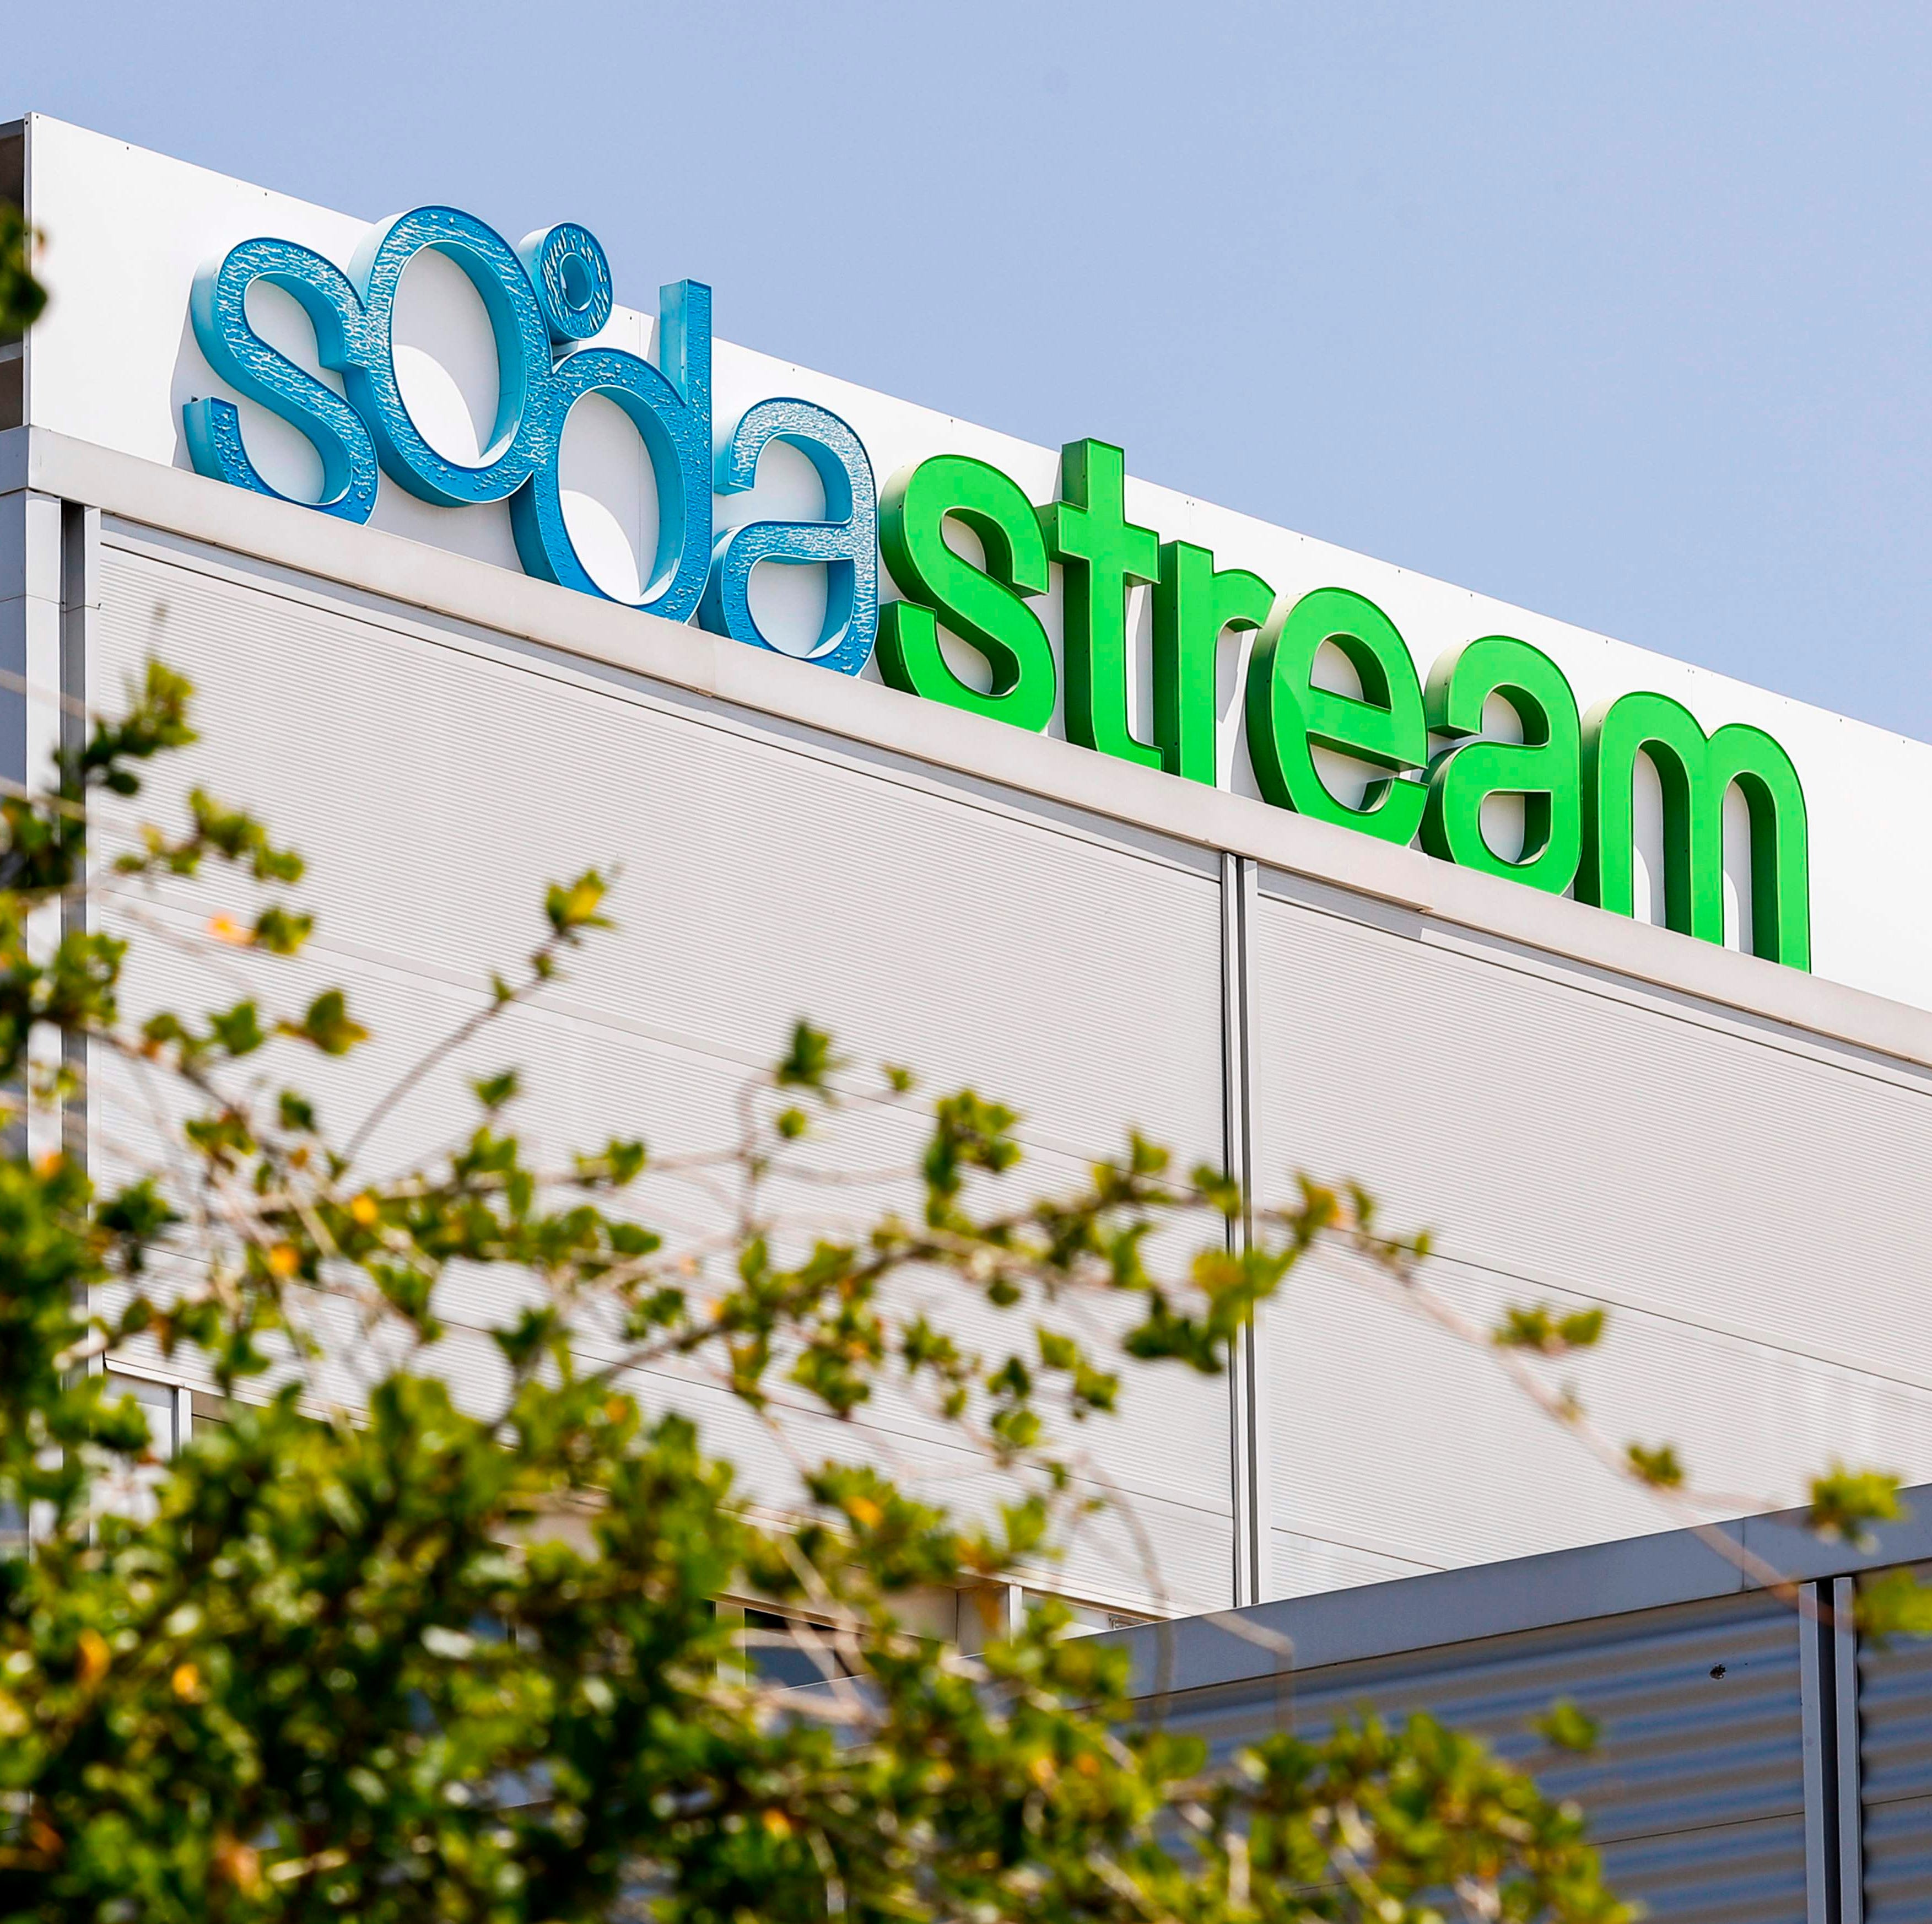 A picture taken August 20, 2018 shows the head offices of the company SodaStream, an Israeli maker of carbonation products, in the city of Lod, 15 kilometres southeast of Tel Aviv. - PepsiCo said Monday it plans to buy SodaStream for $3.2 billion as 